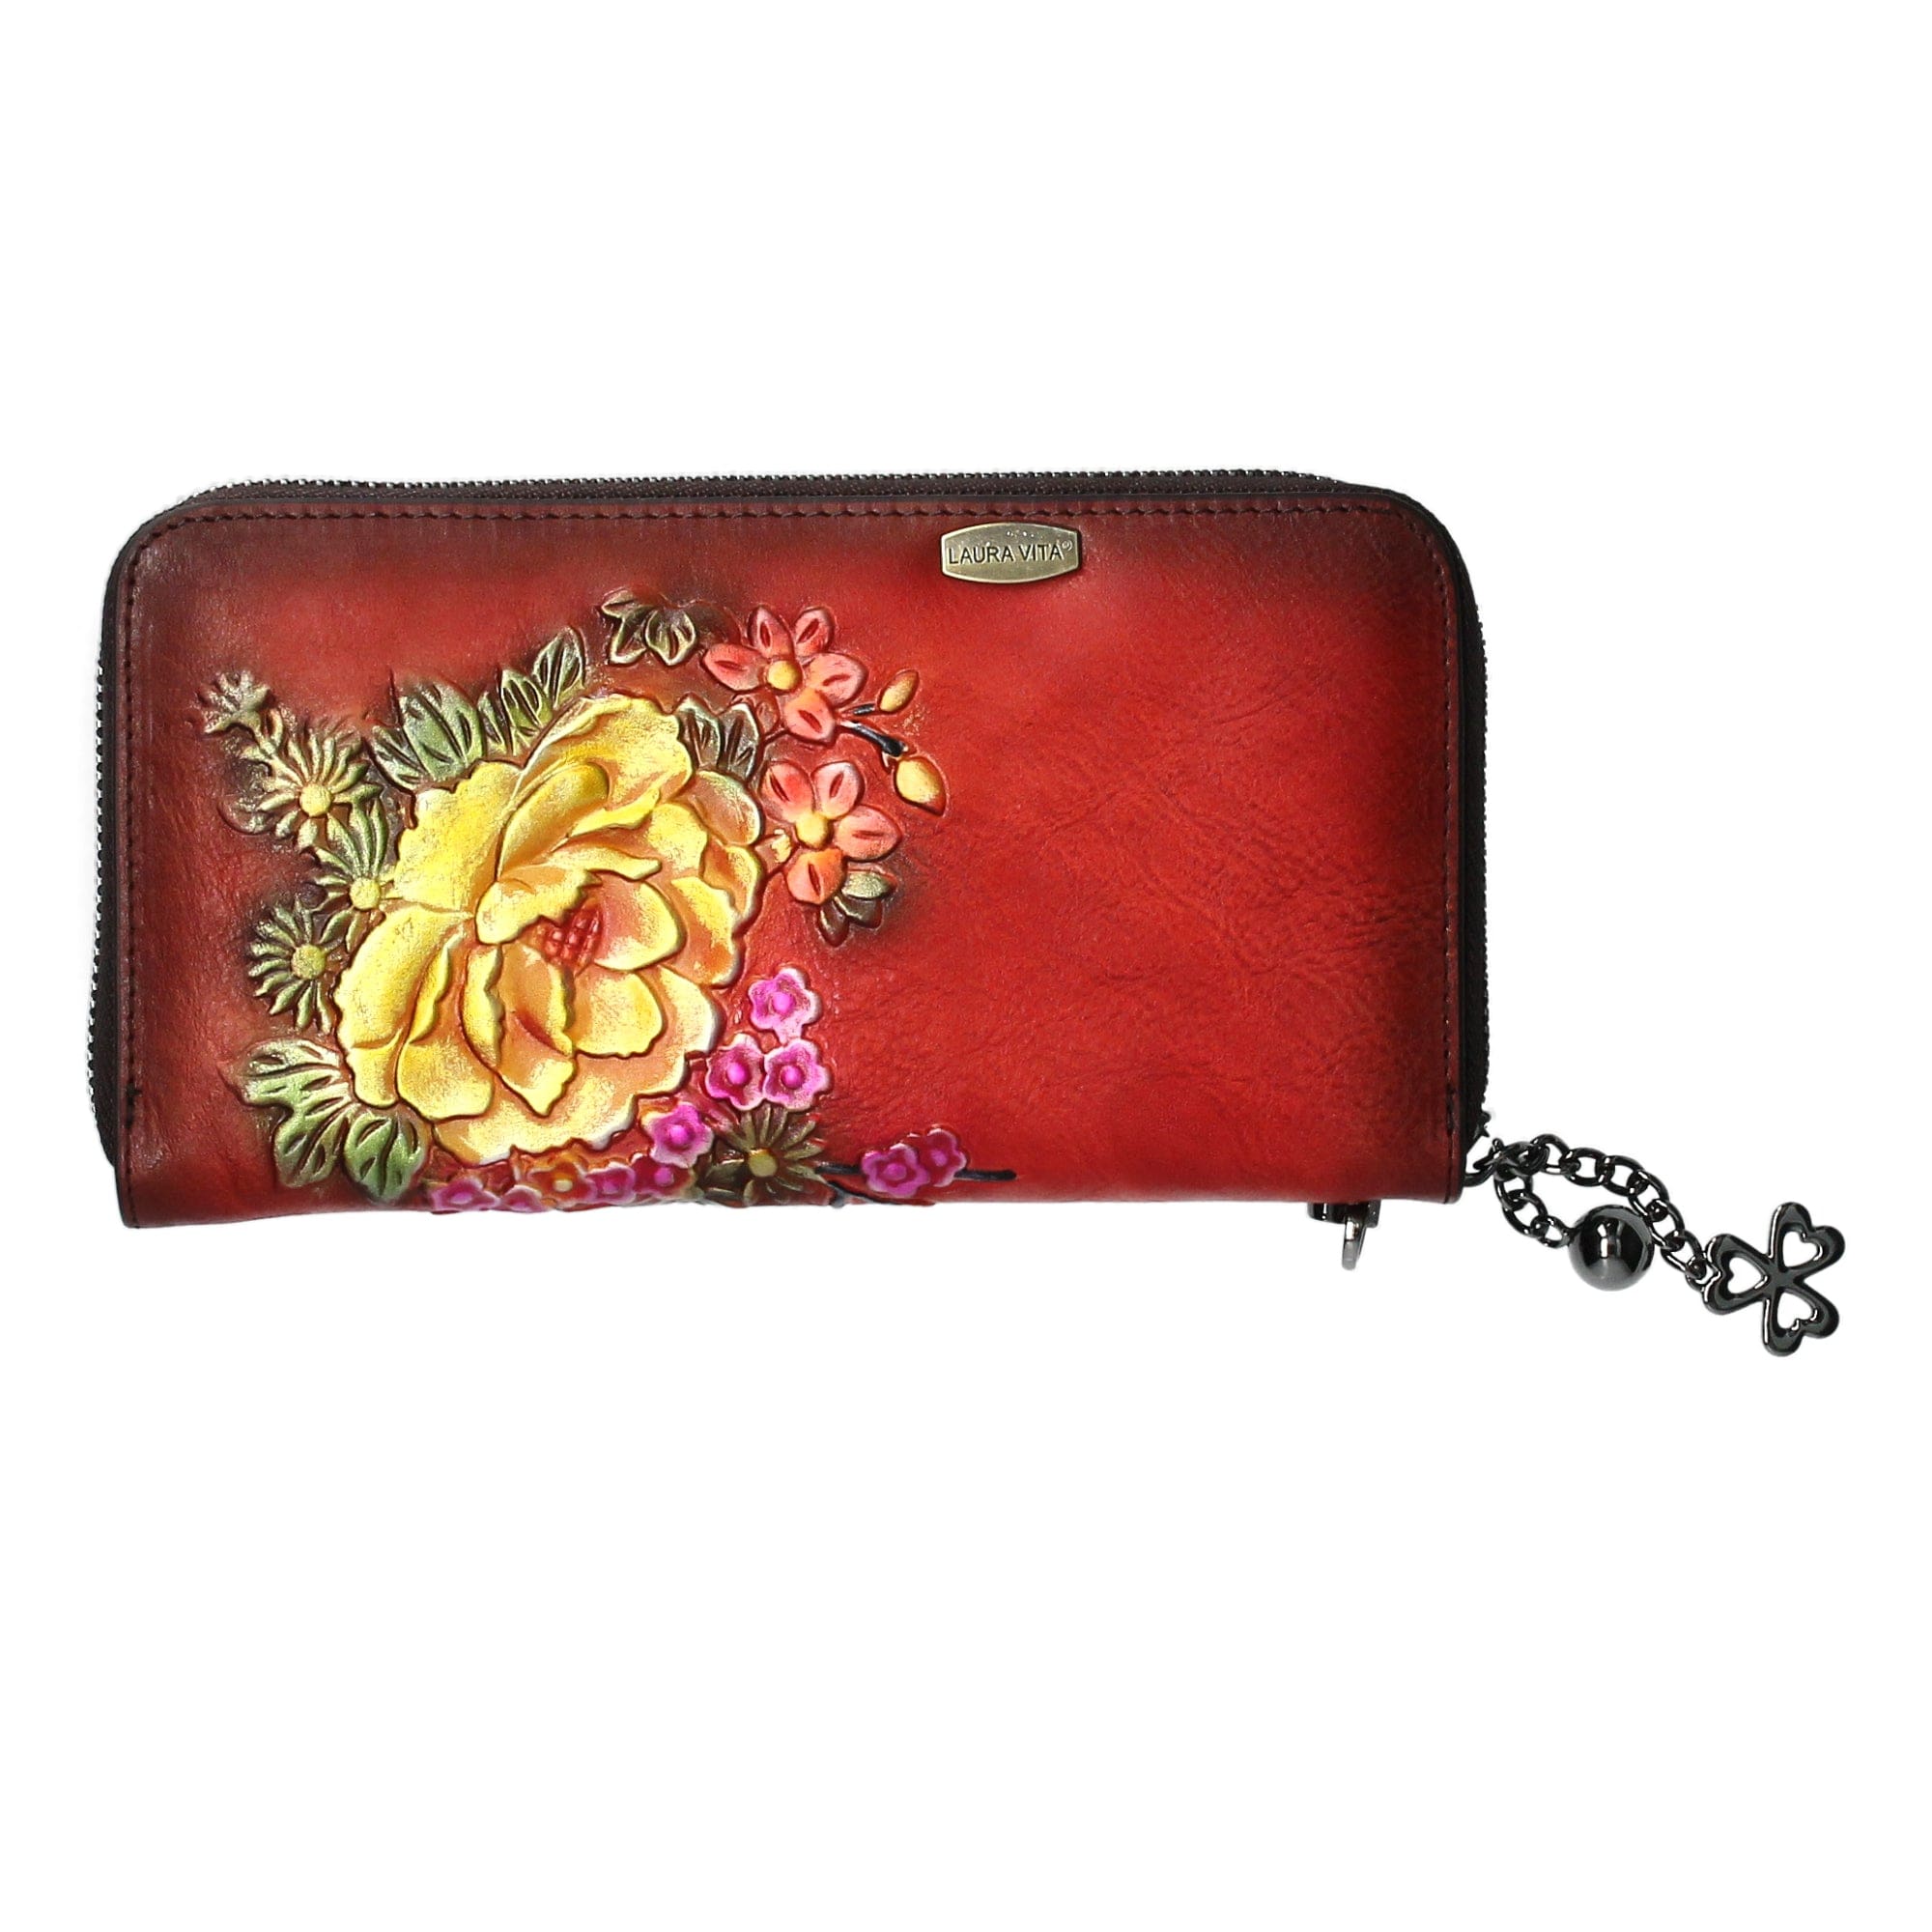 Leather Market wallet - Red - Small leather goods